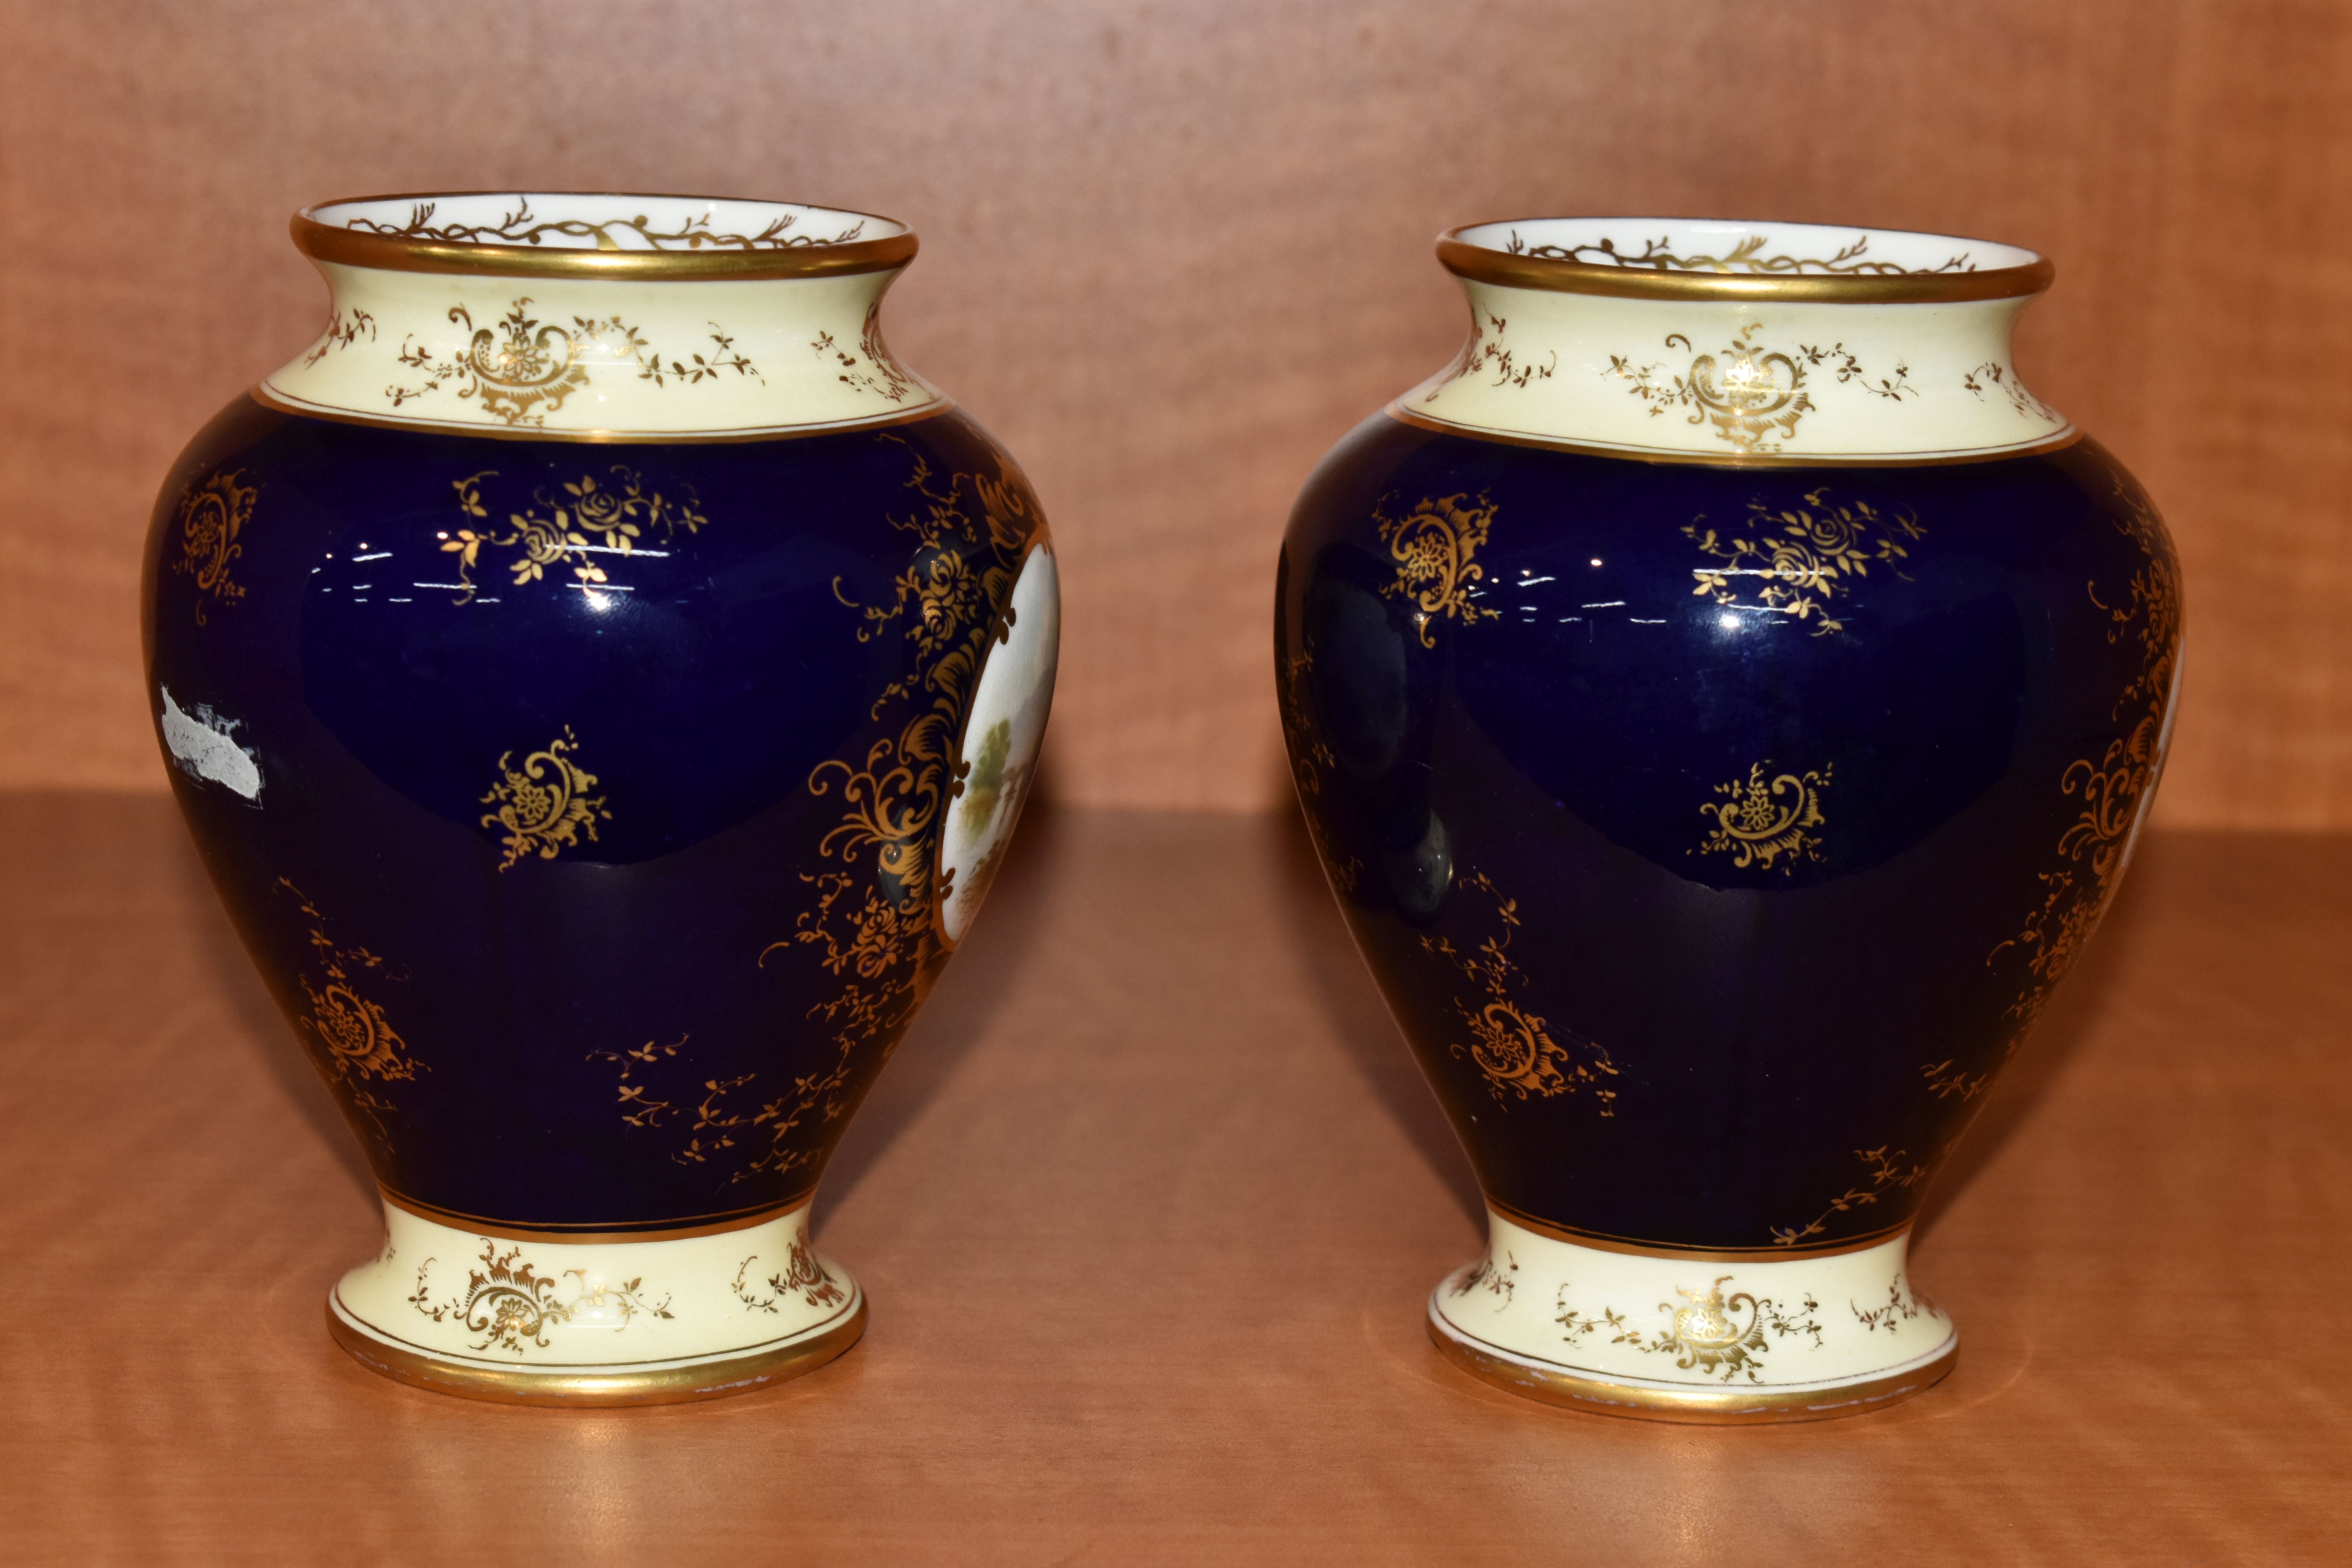 A PAIR OF LATE 19TH / EARLY 20TH CENTURY COALPORT BALUSTER VASES, blue, pale yellow and gilt - Image 4 of 9